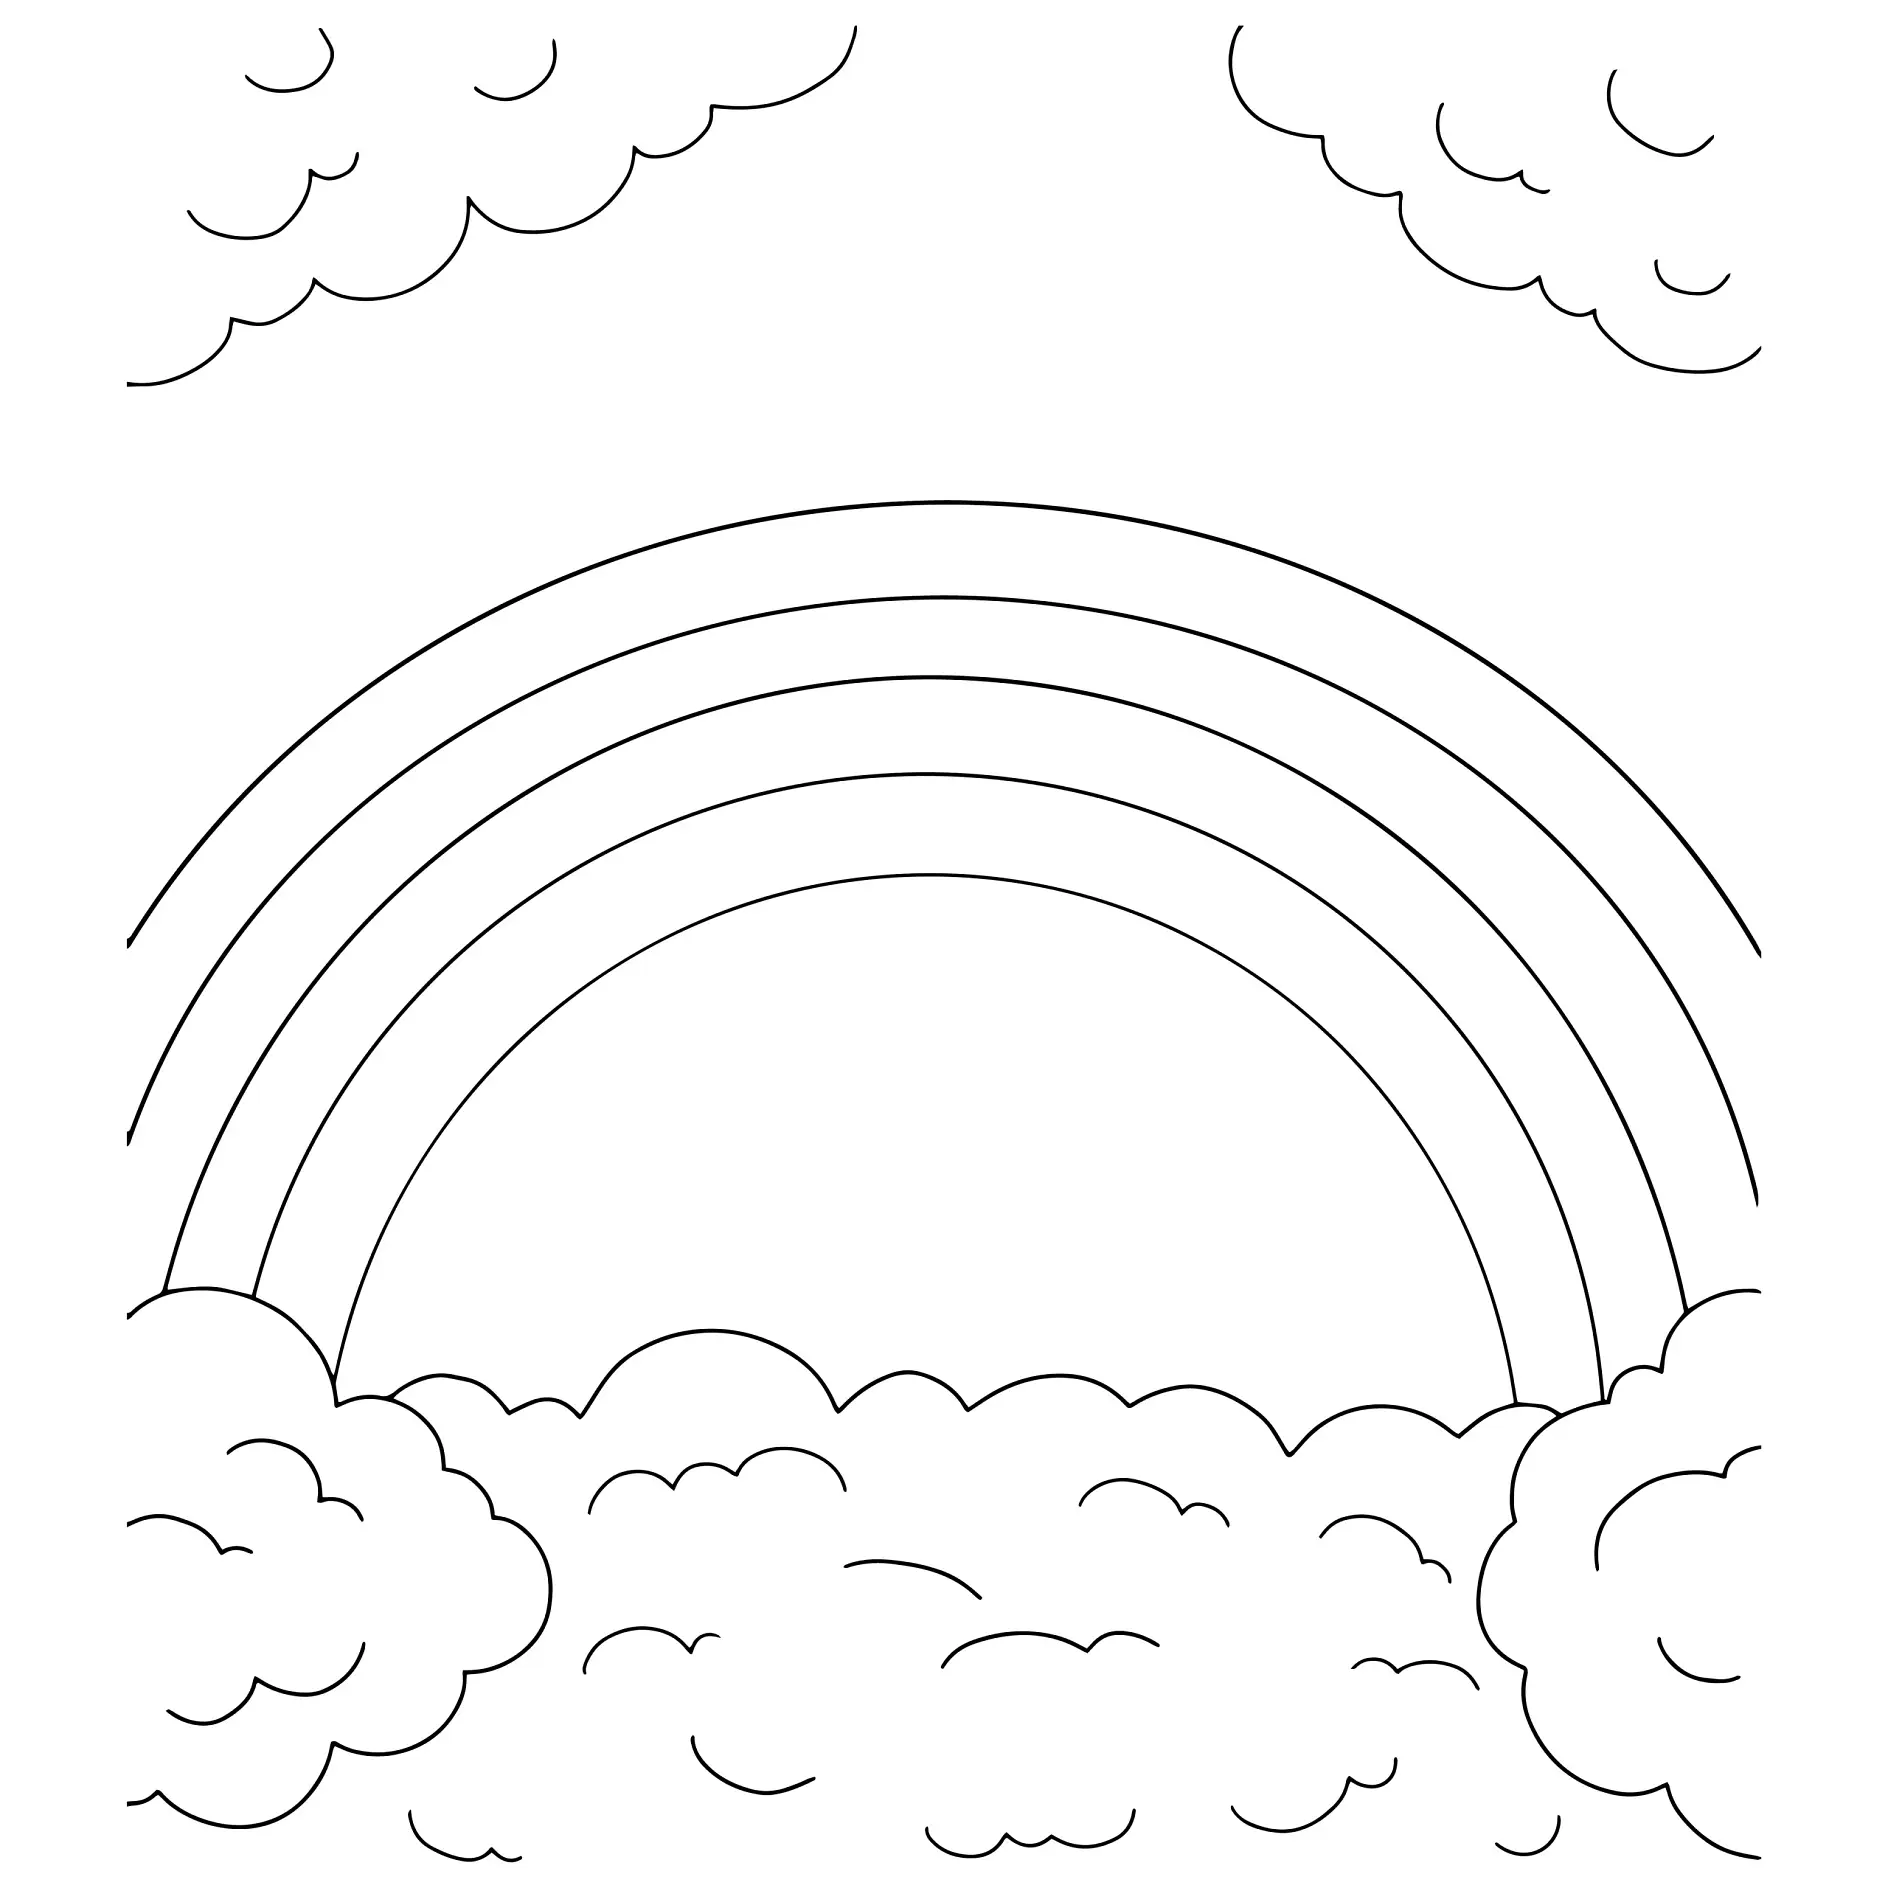 Rainbow on clouds. Coloring book page for kids. Cartoon style. Vector illustration isolated on white background.